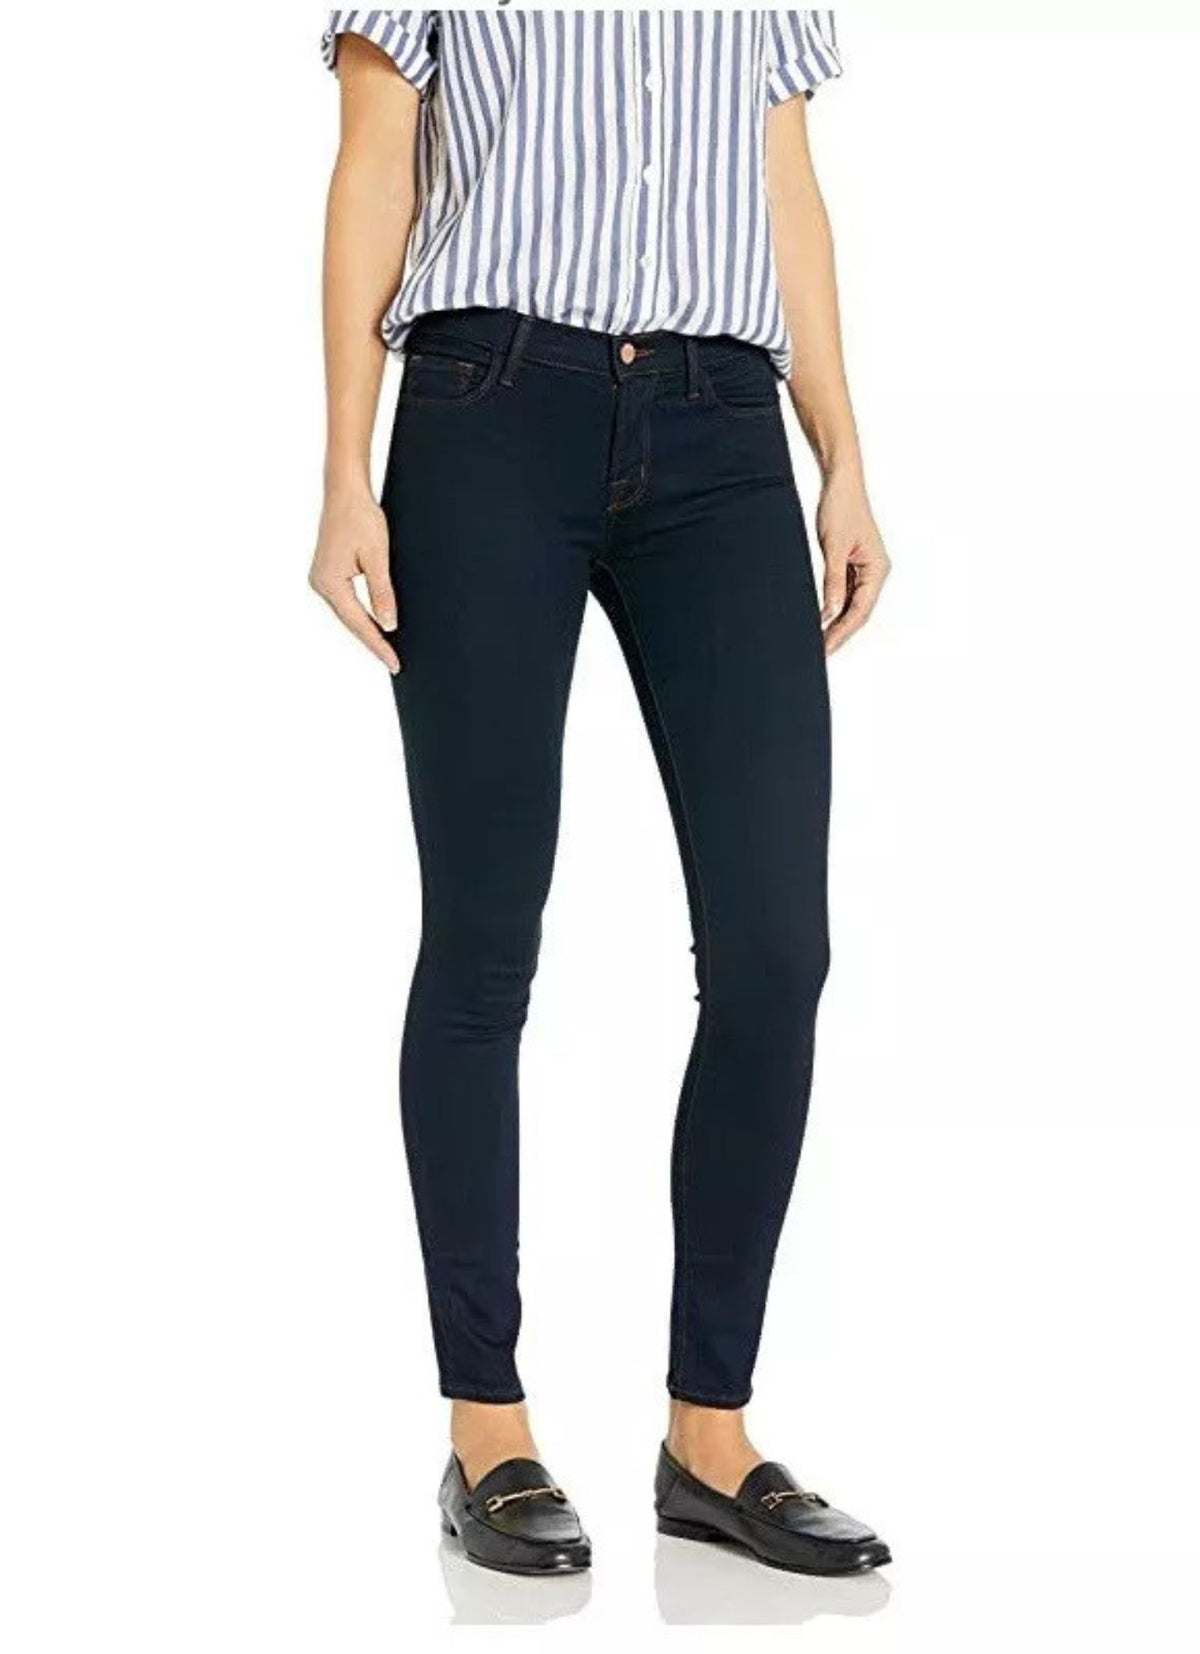 J Brand Clean Skinny Jeans - Second Chance